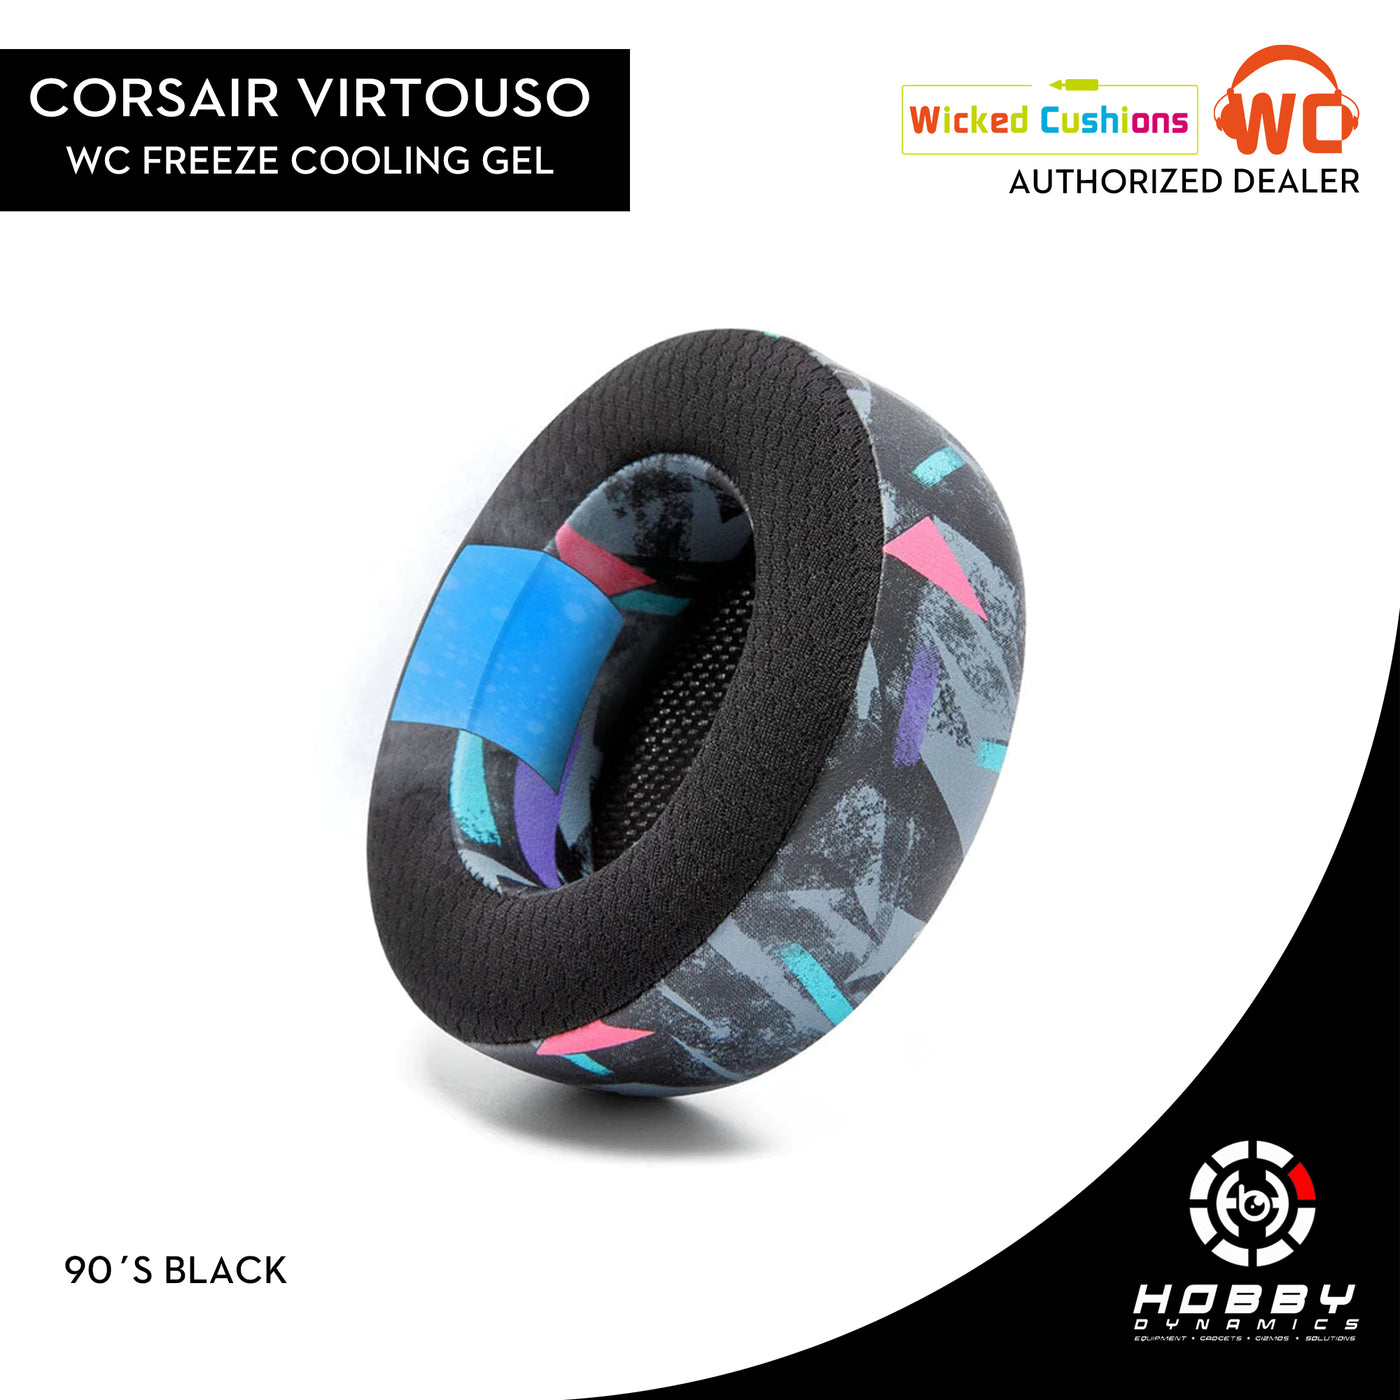 Wicked Cushions FreeZe Virtuoso Replacement Earpads - Hybrid Cooling Gel Gaming Ear Cushions